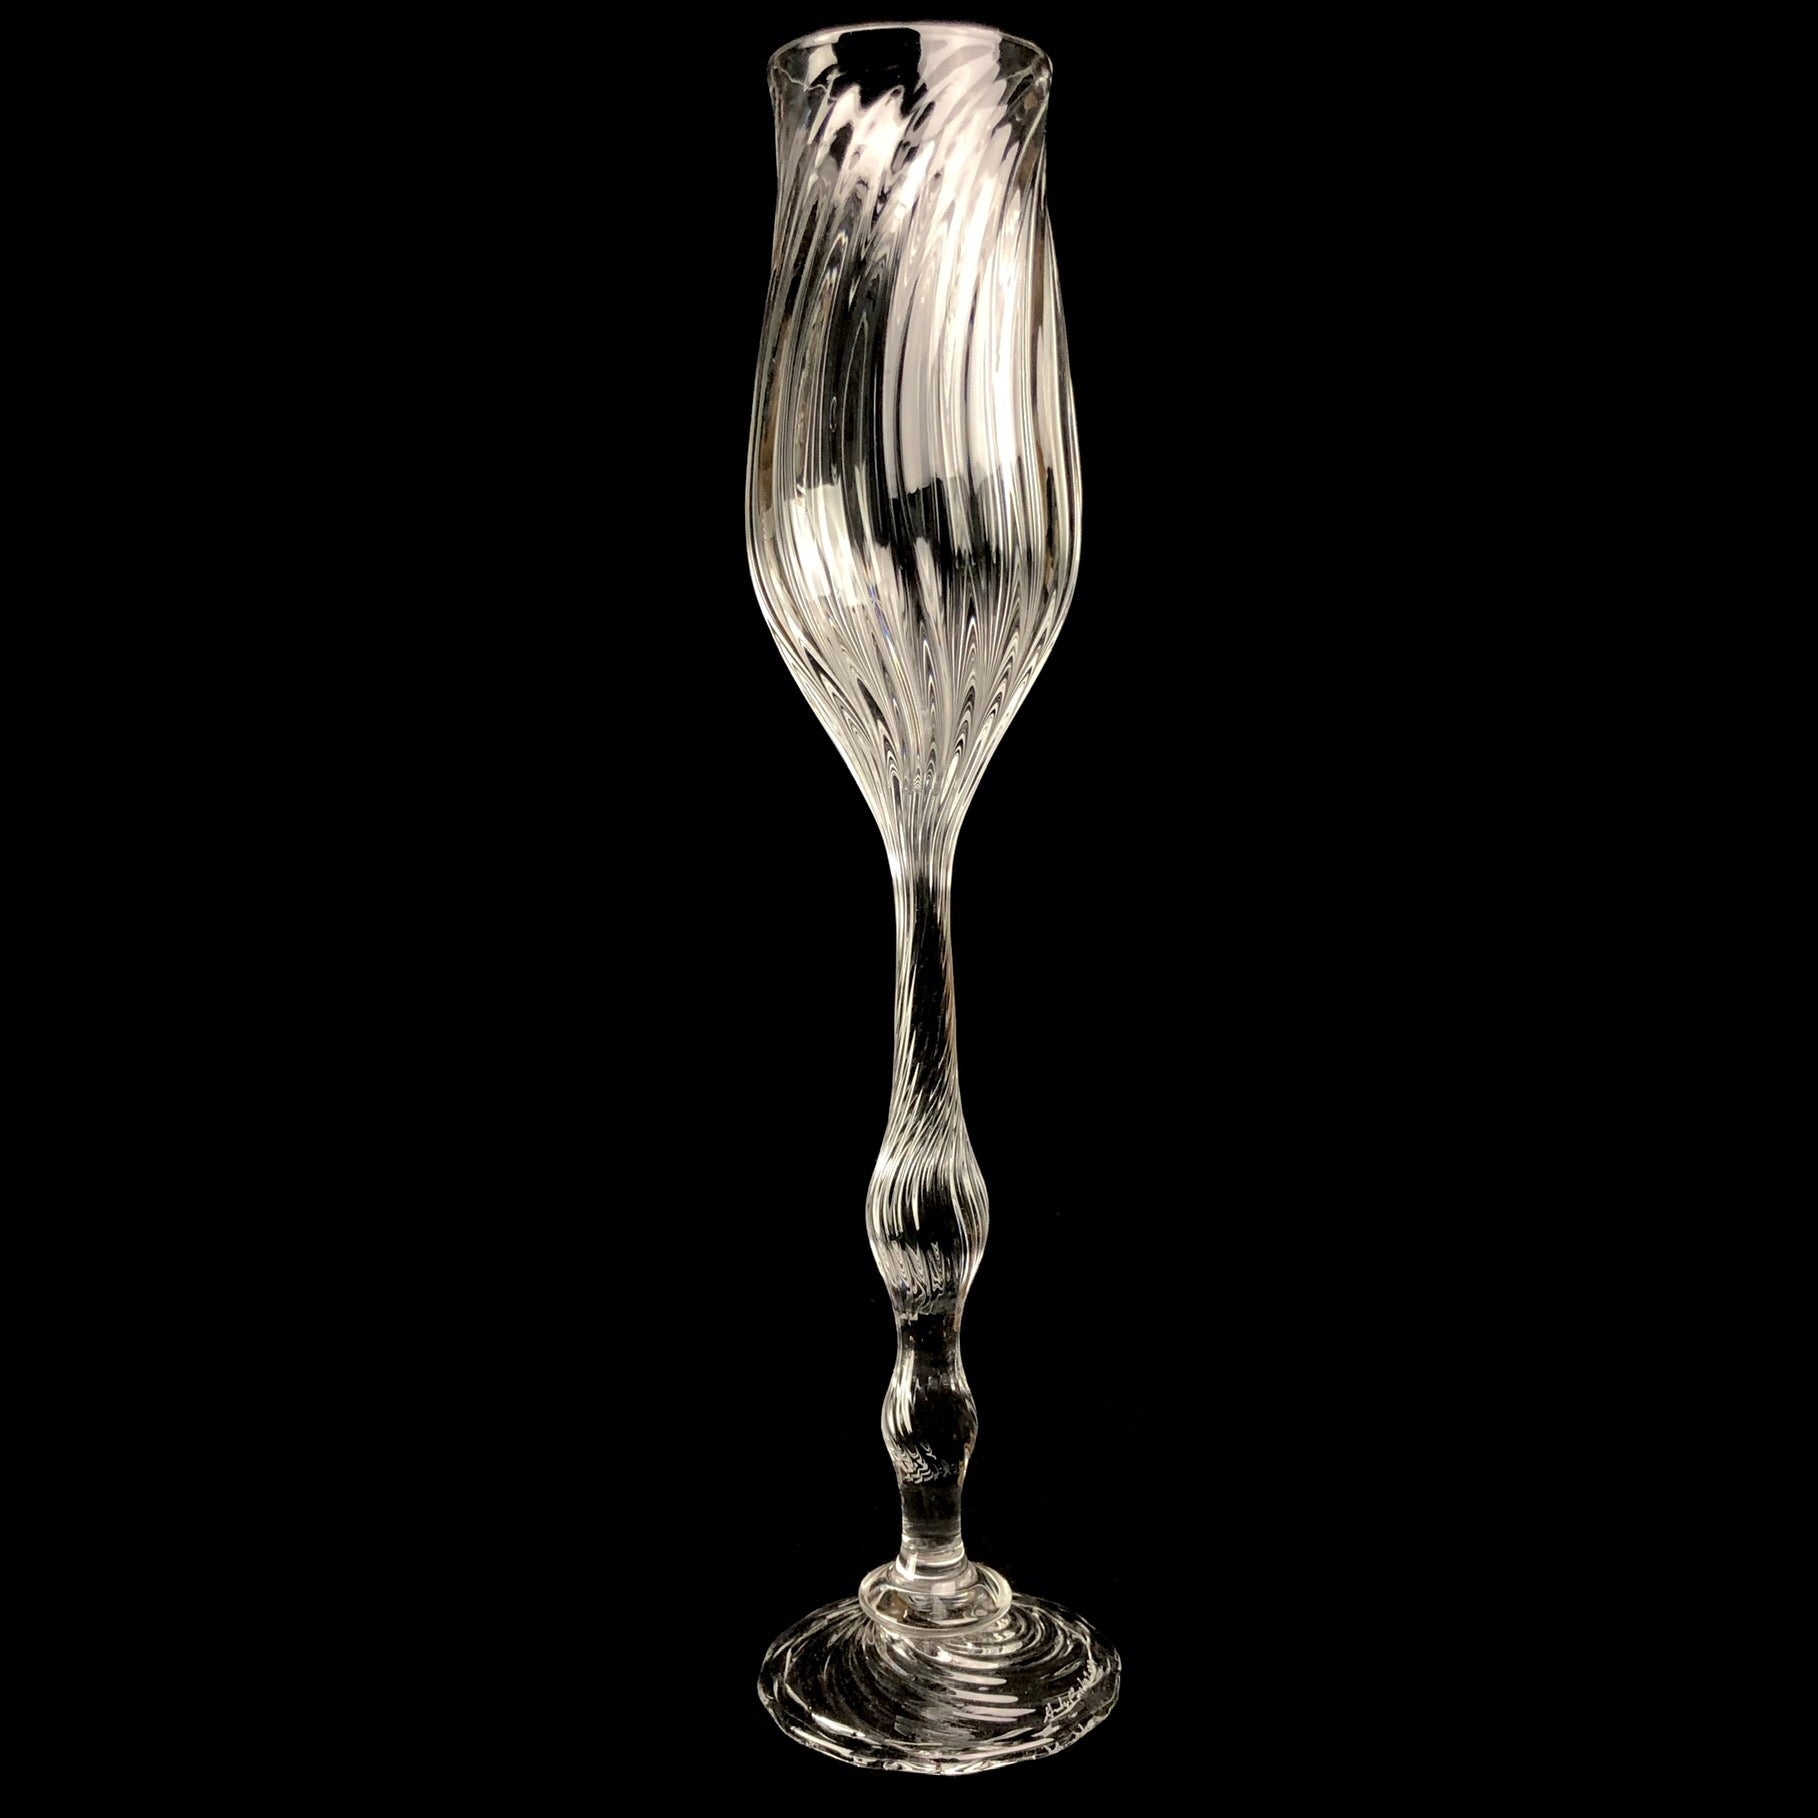 Clear glass goblet with ornate ribbed design